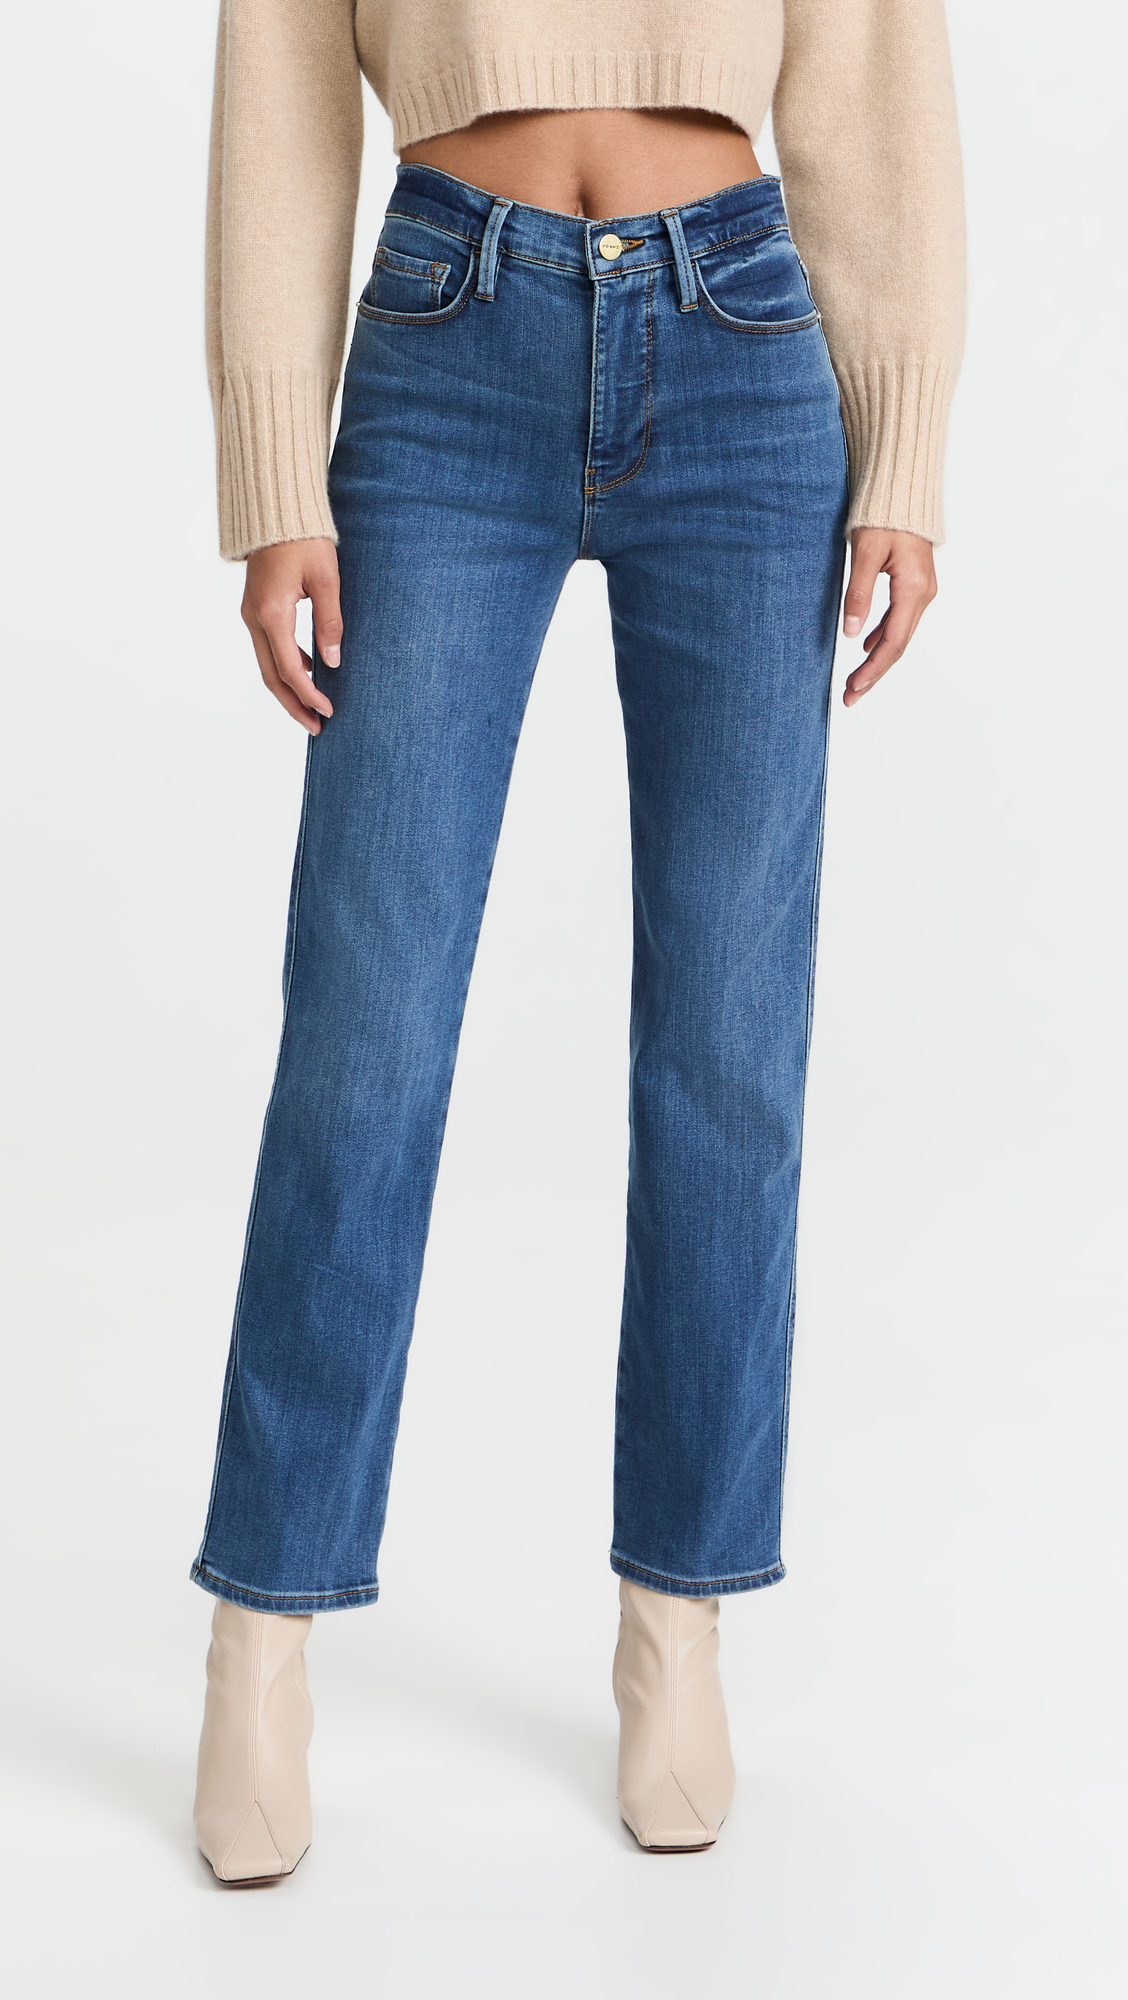 The 11 Most Popular Designer Jeans With a Cult Following | Who What Wear